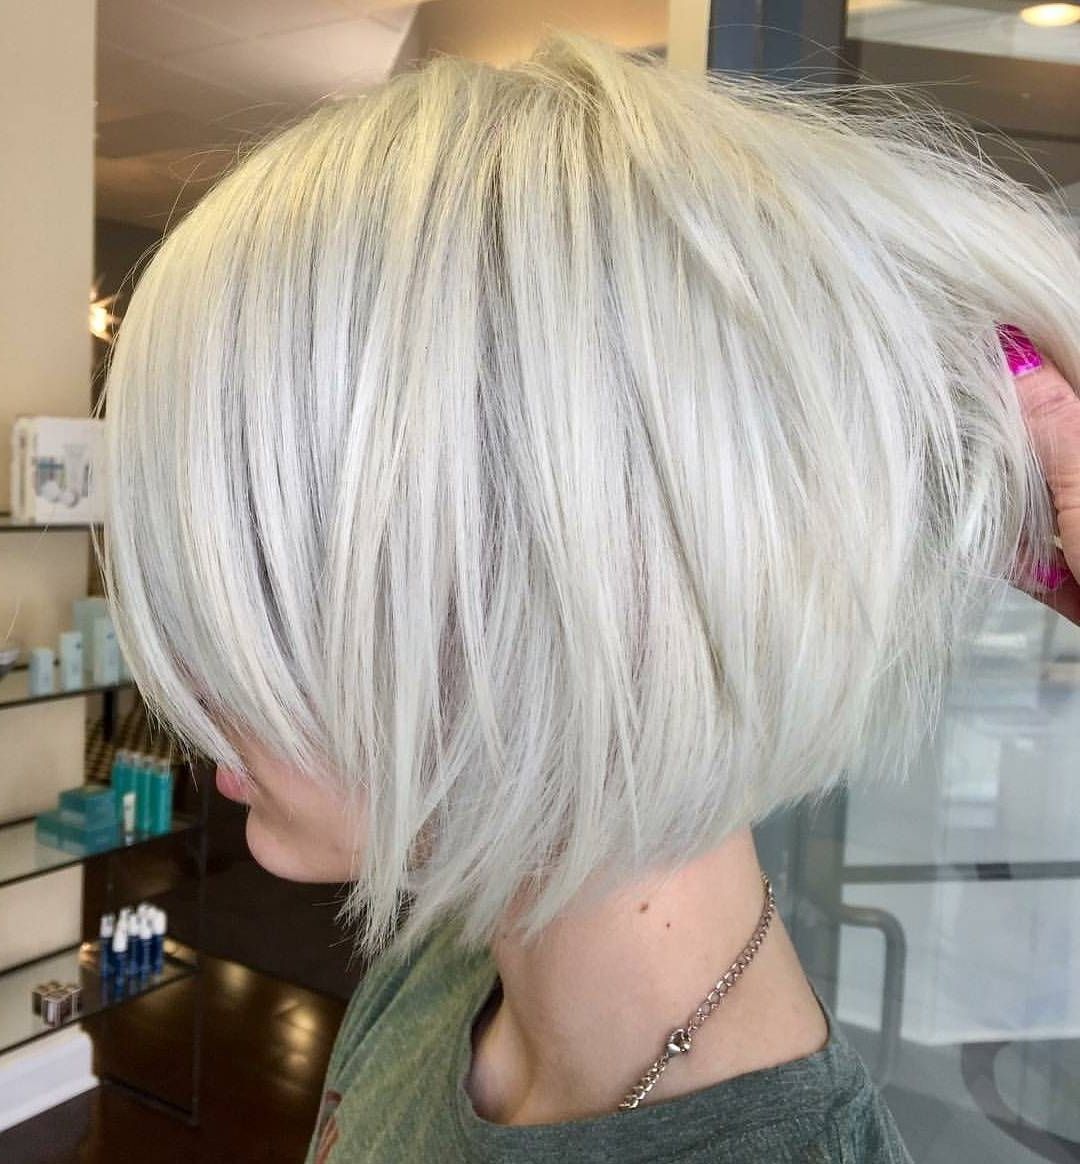 10 Layered Bob Hairstyles – Look Fab In New Blonde Shades! – Popular Regarding Fashionable Textured Platinum Blonde Bob Hairstyles (View 10 of 20)